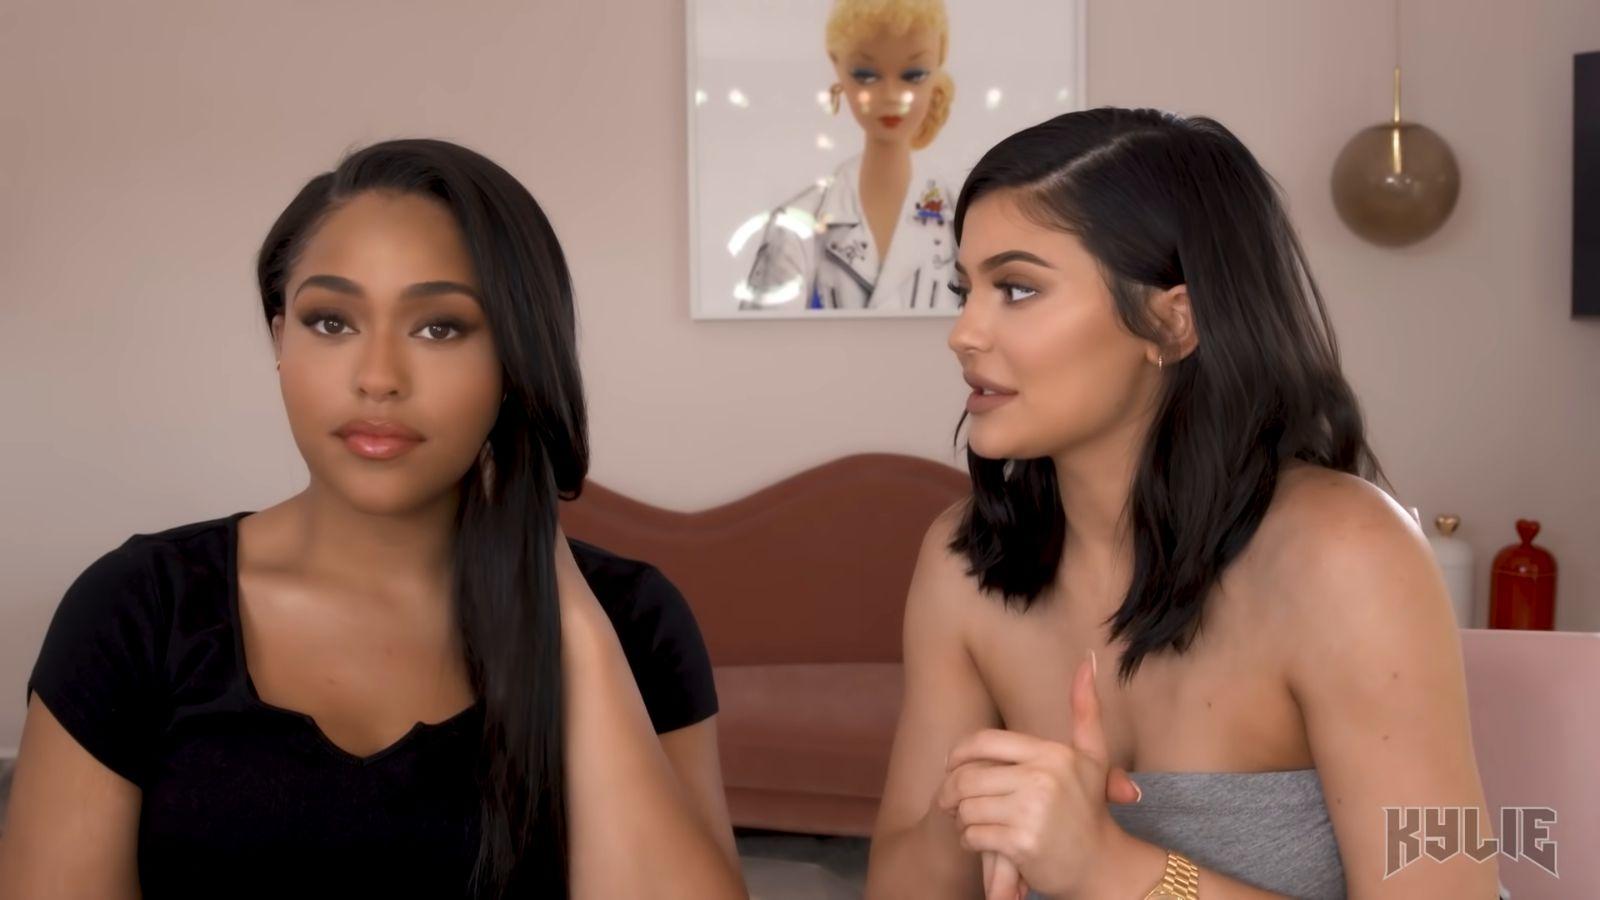 kylie jenner and jordyn woods answering Q&As